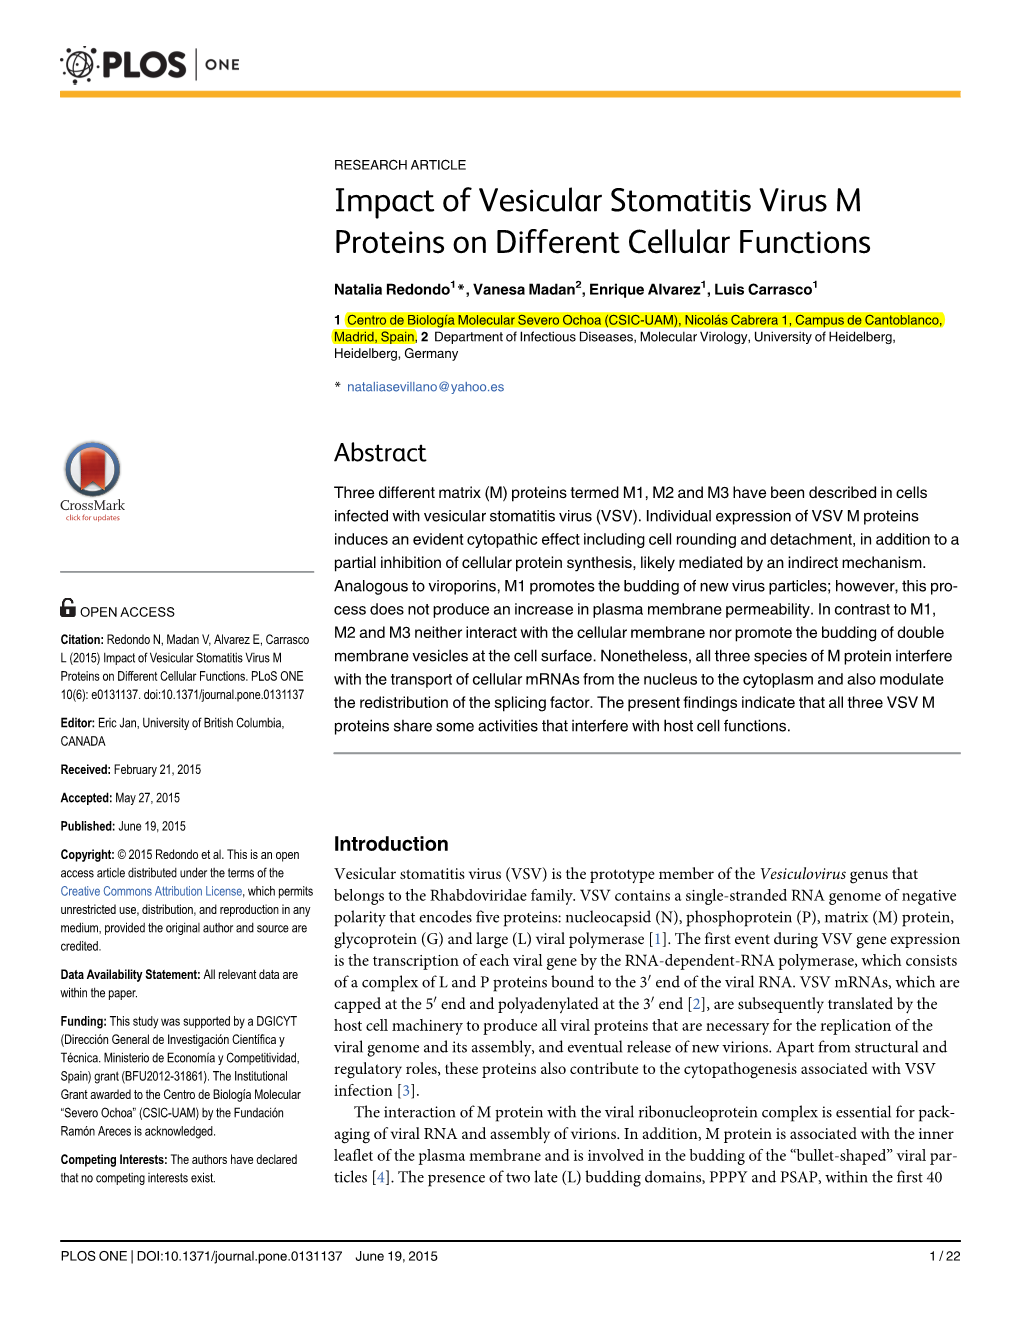 Impact of Vesicular Stomatitis Virus M Proteins on Different Cellular Functions